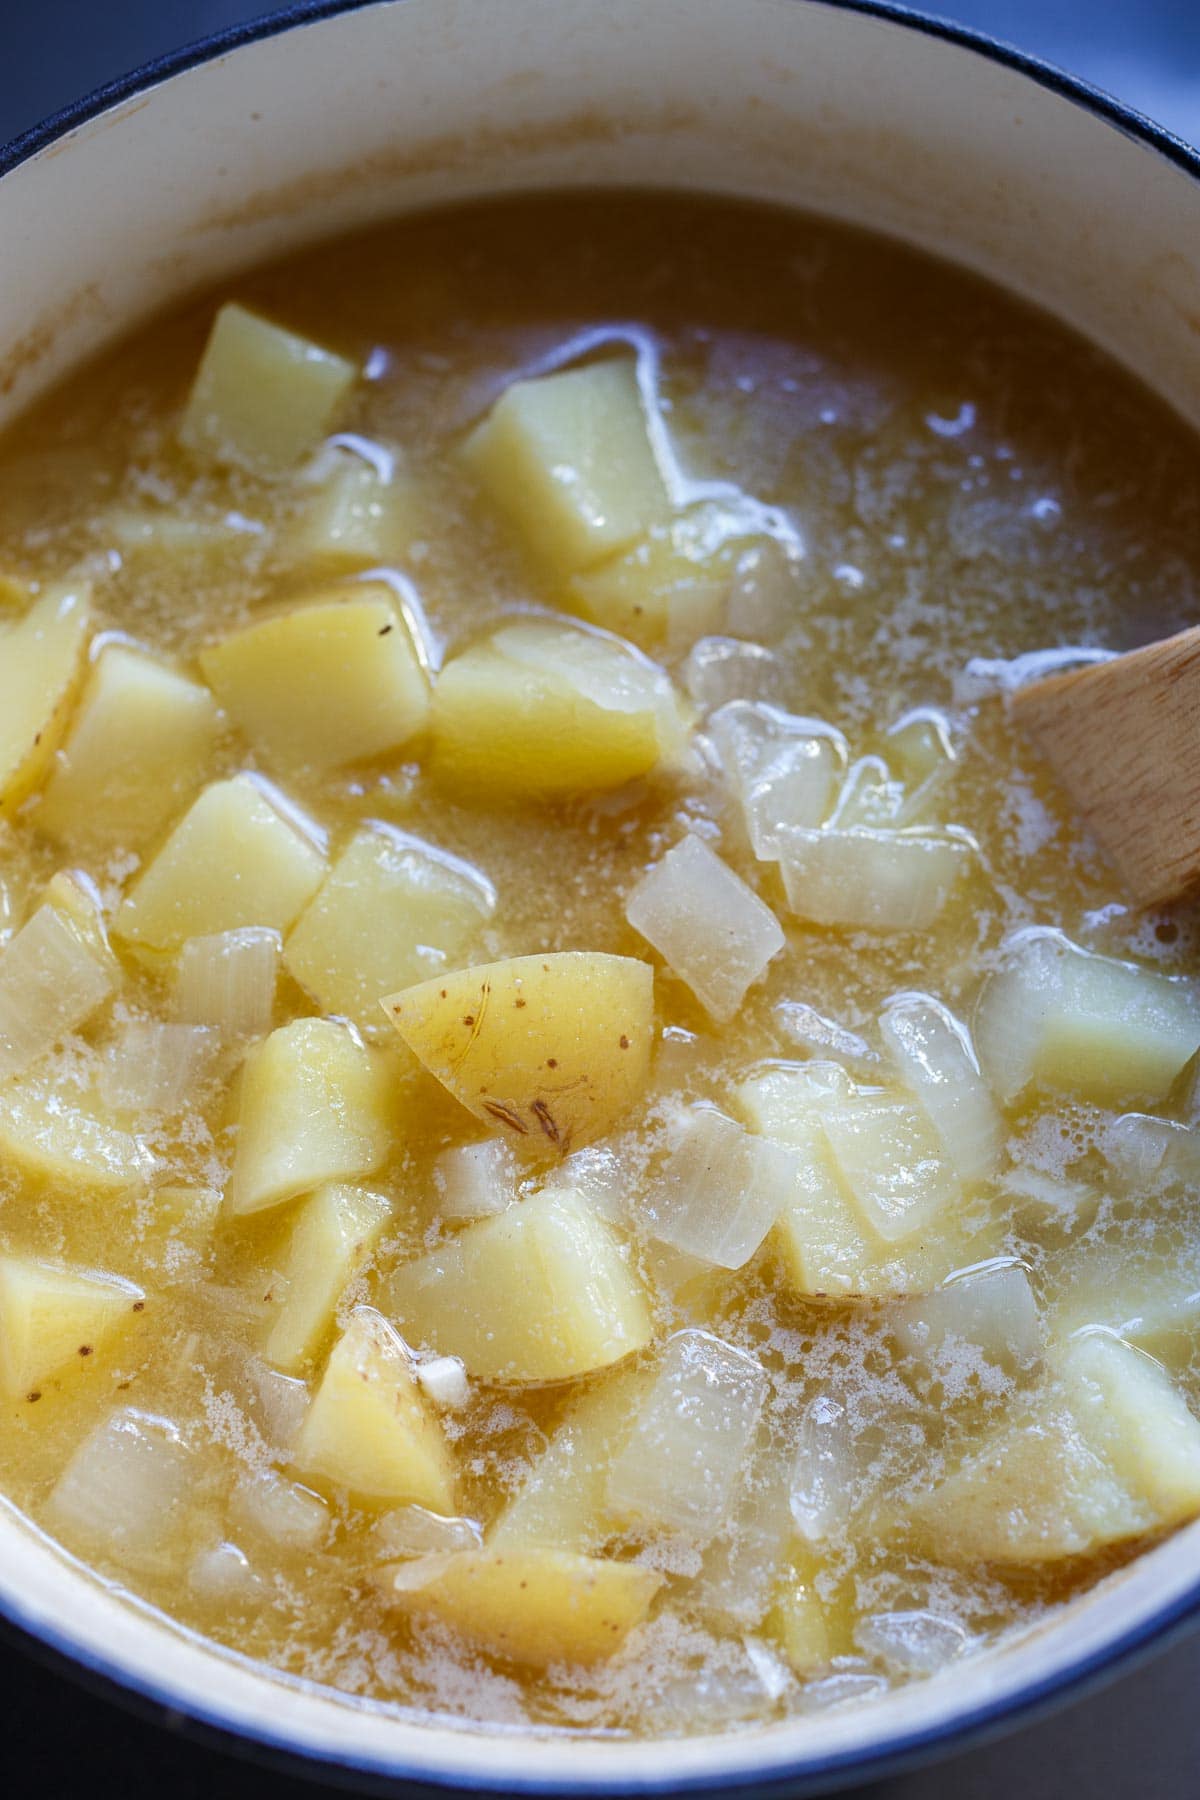 Potatoes cooking in broth.